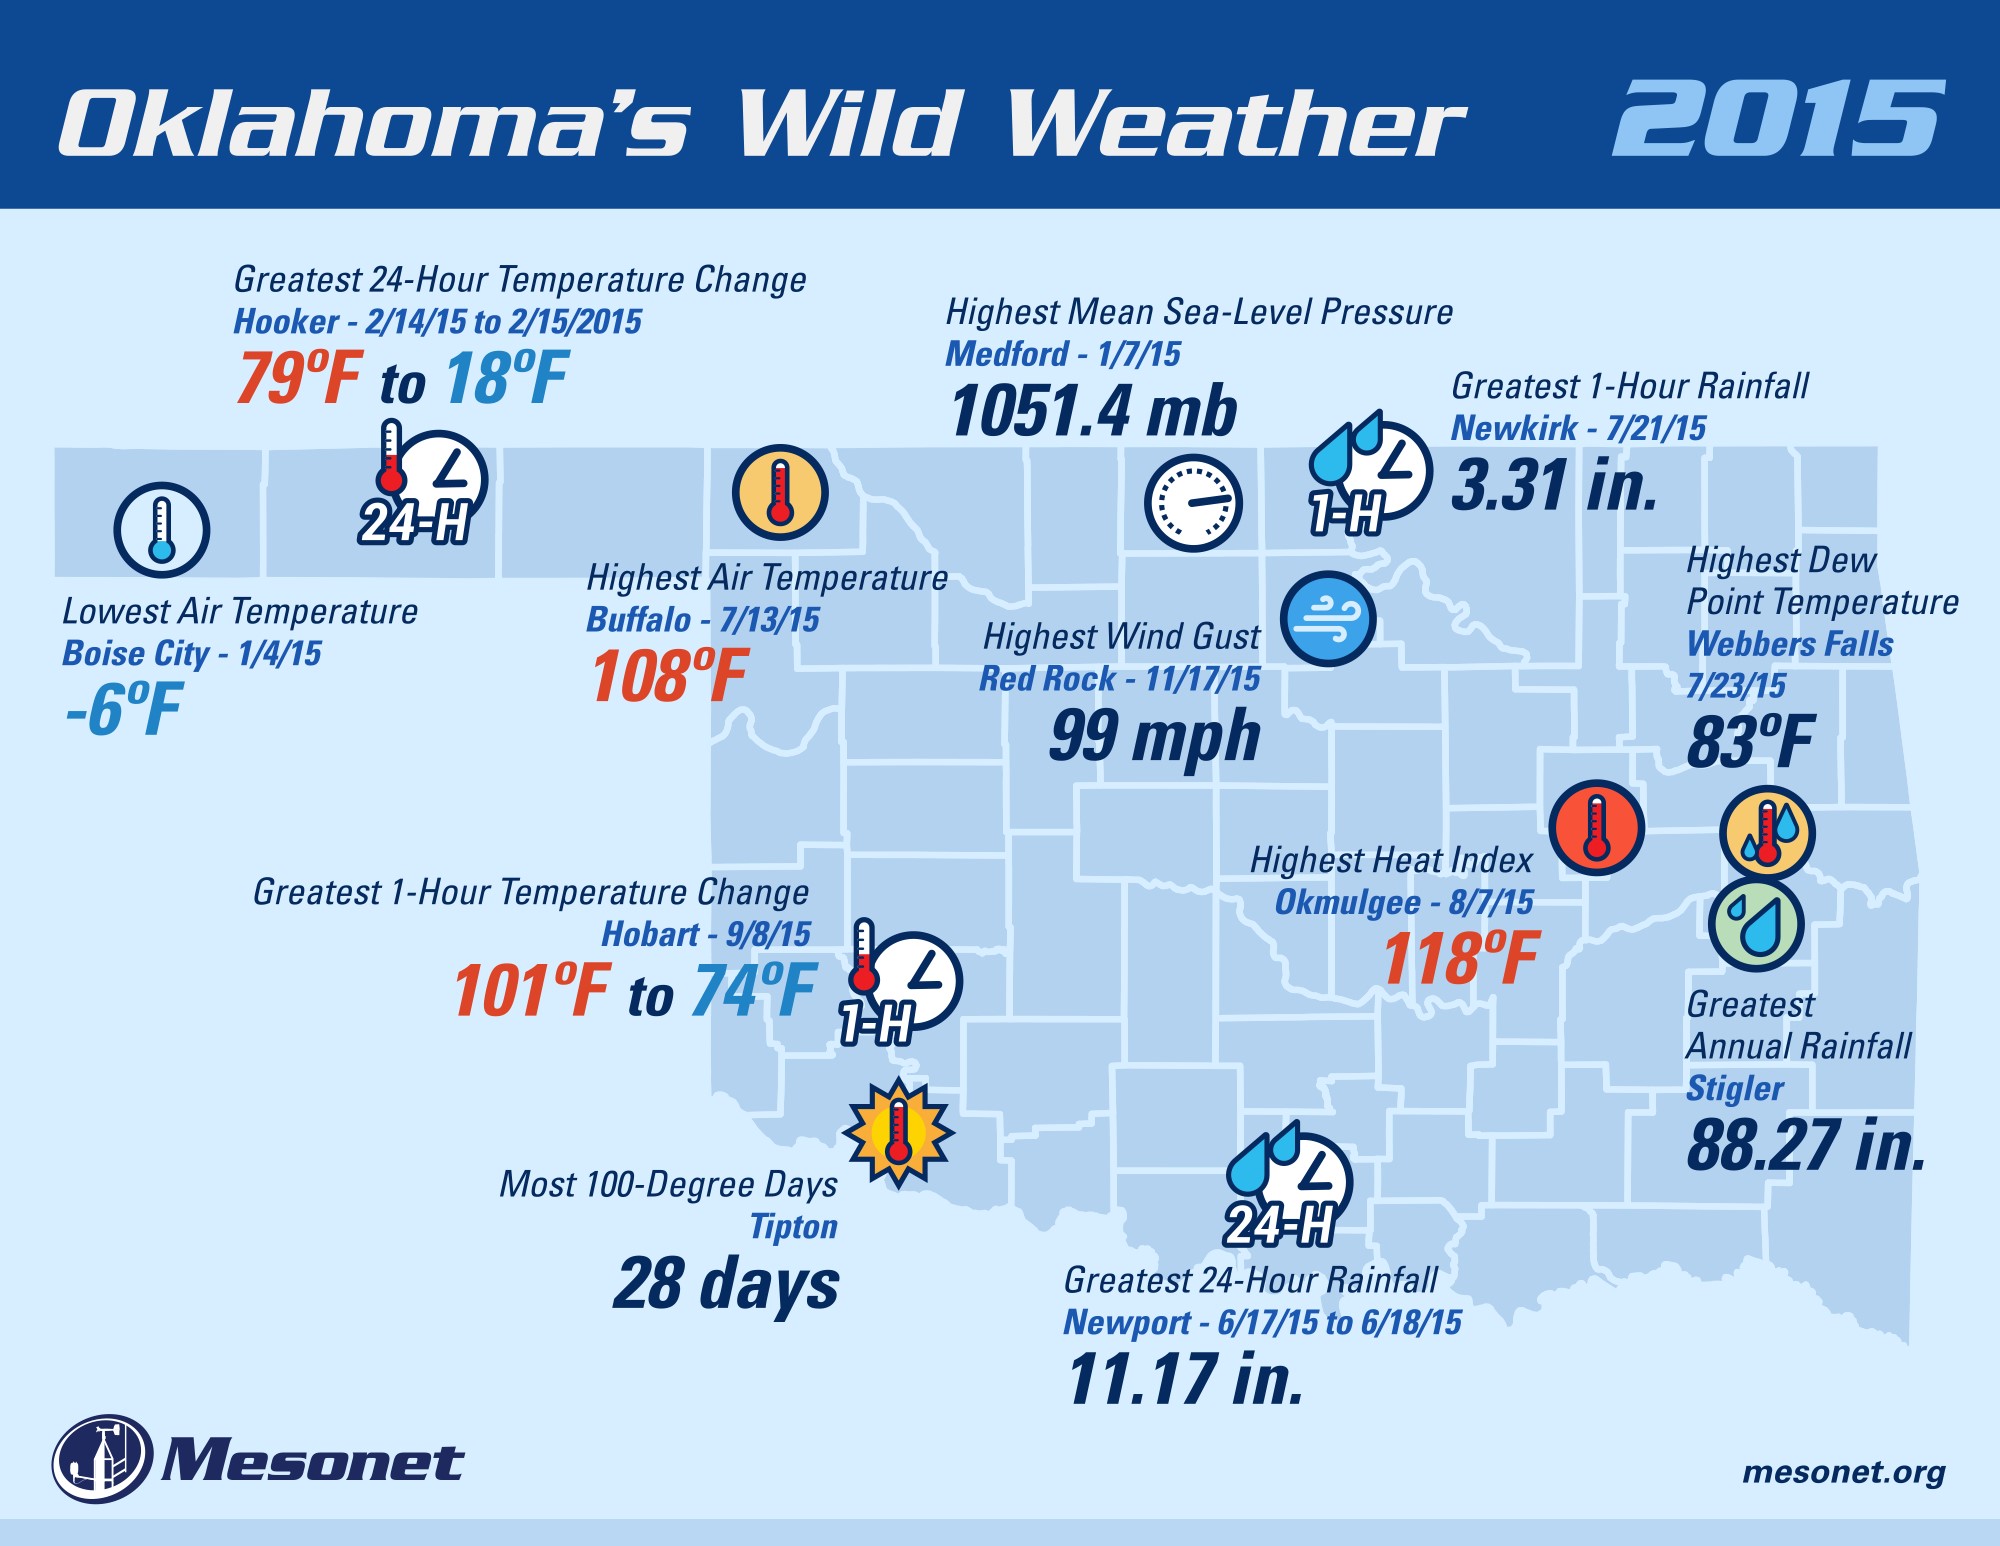 Wet December Assures 2015 is Wettest Year Ever for Oklahoma